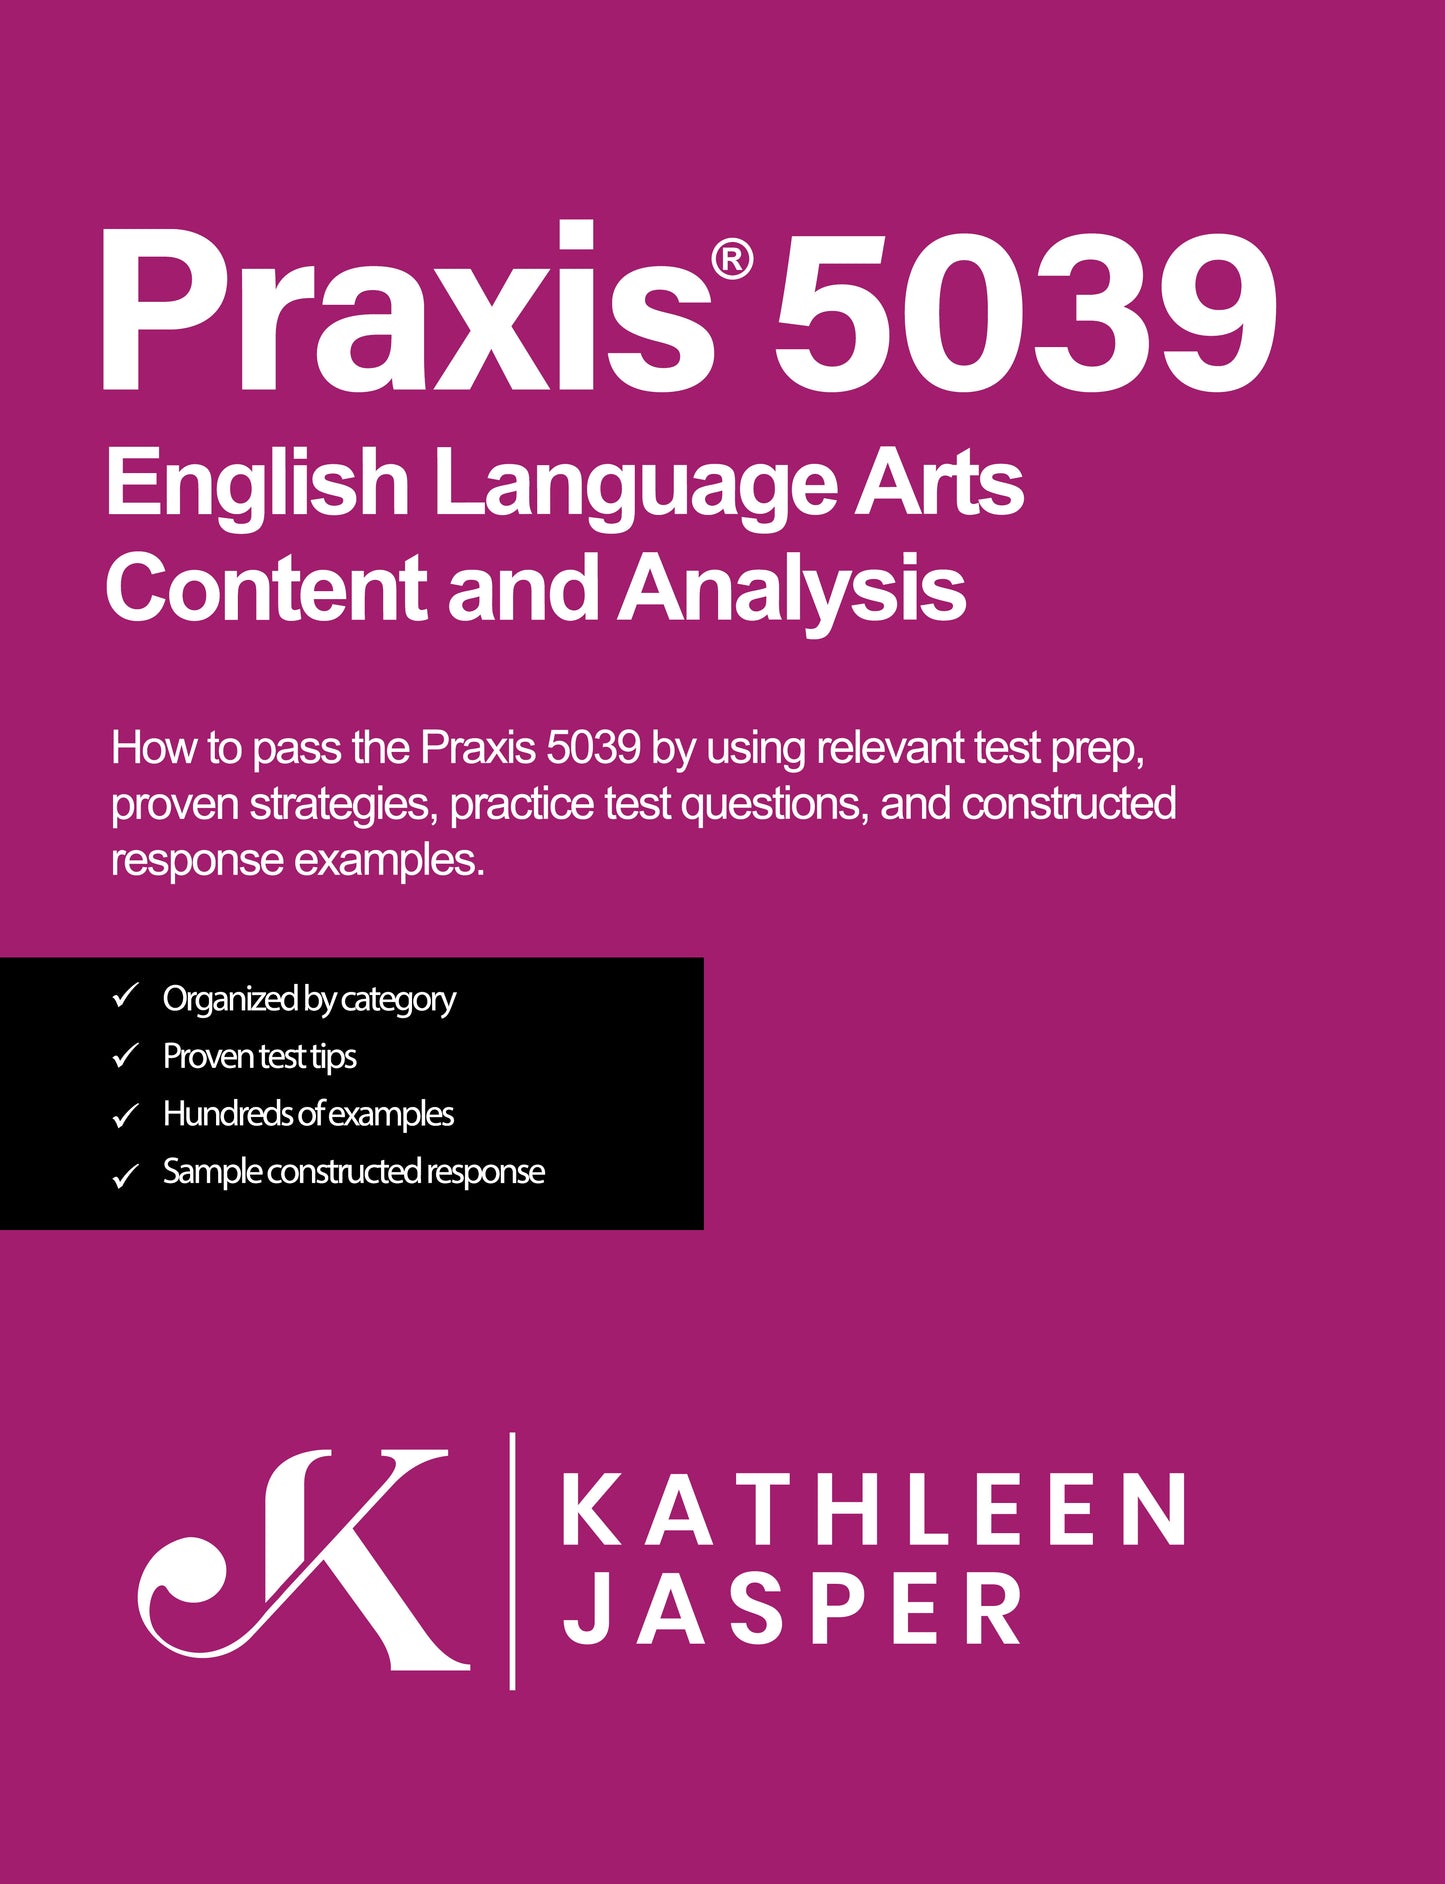 Praxis 5039 English Language Arts Content and Analysis - Digital Study Guide